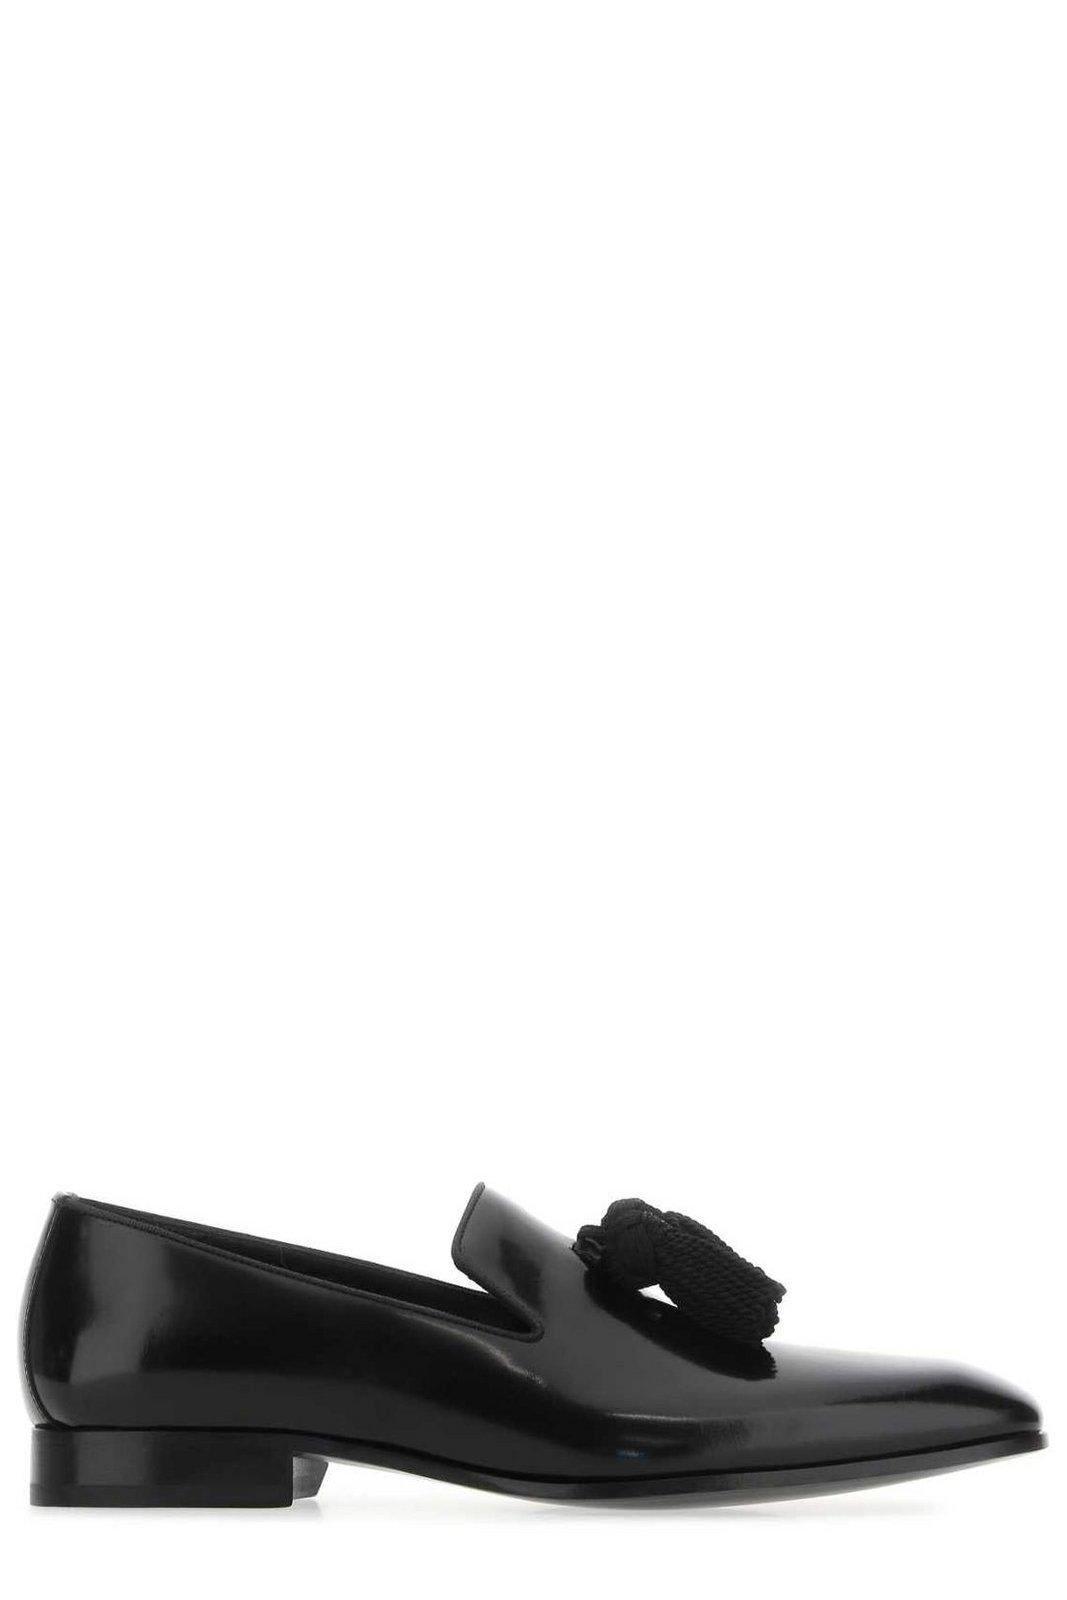 Shop Jimmy Choo Foxley Slip-on Loafers In Black